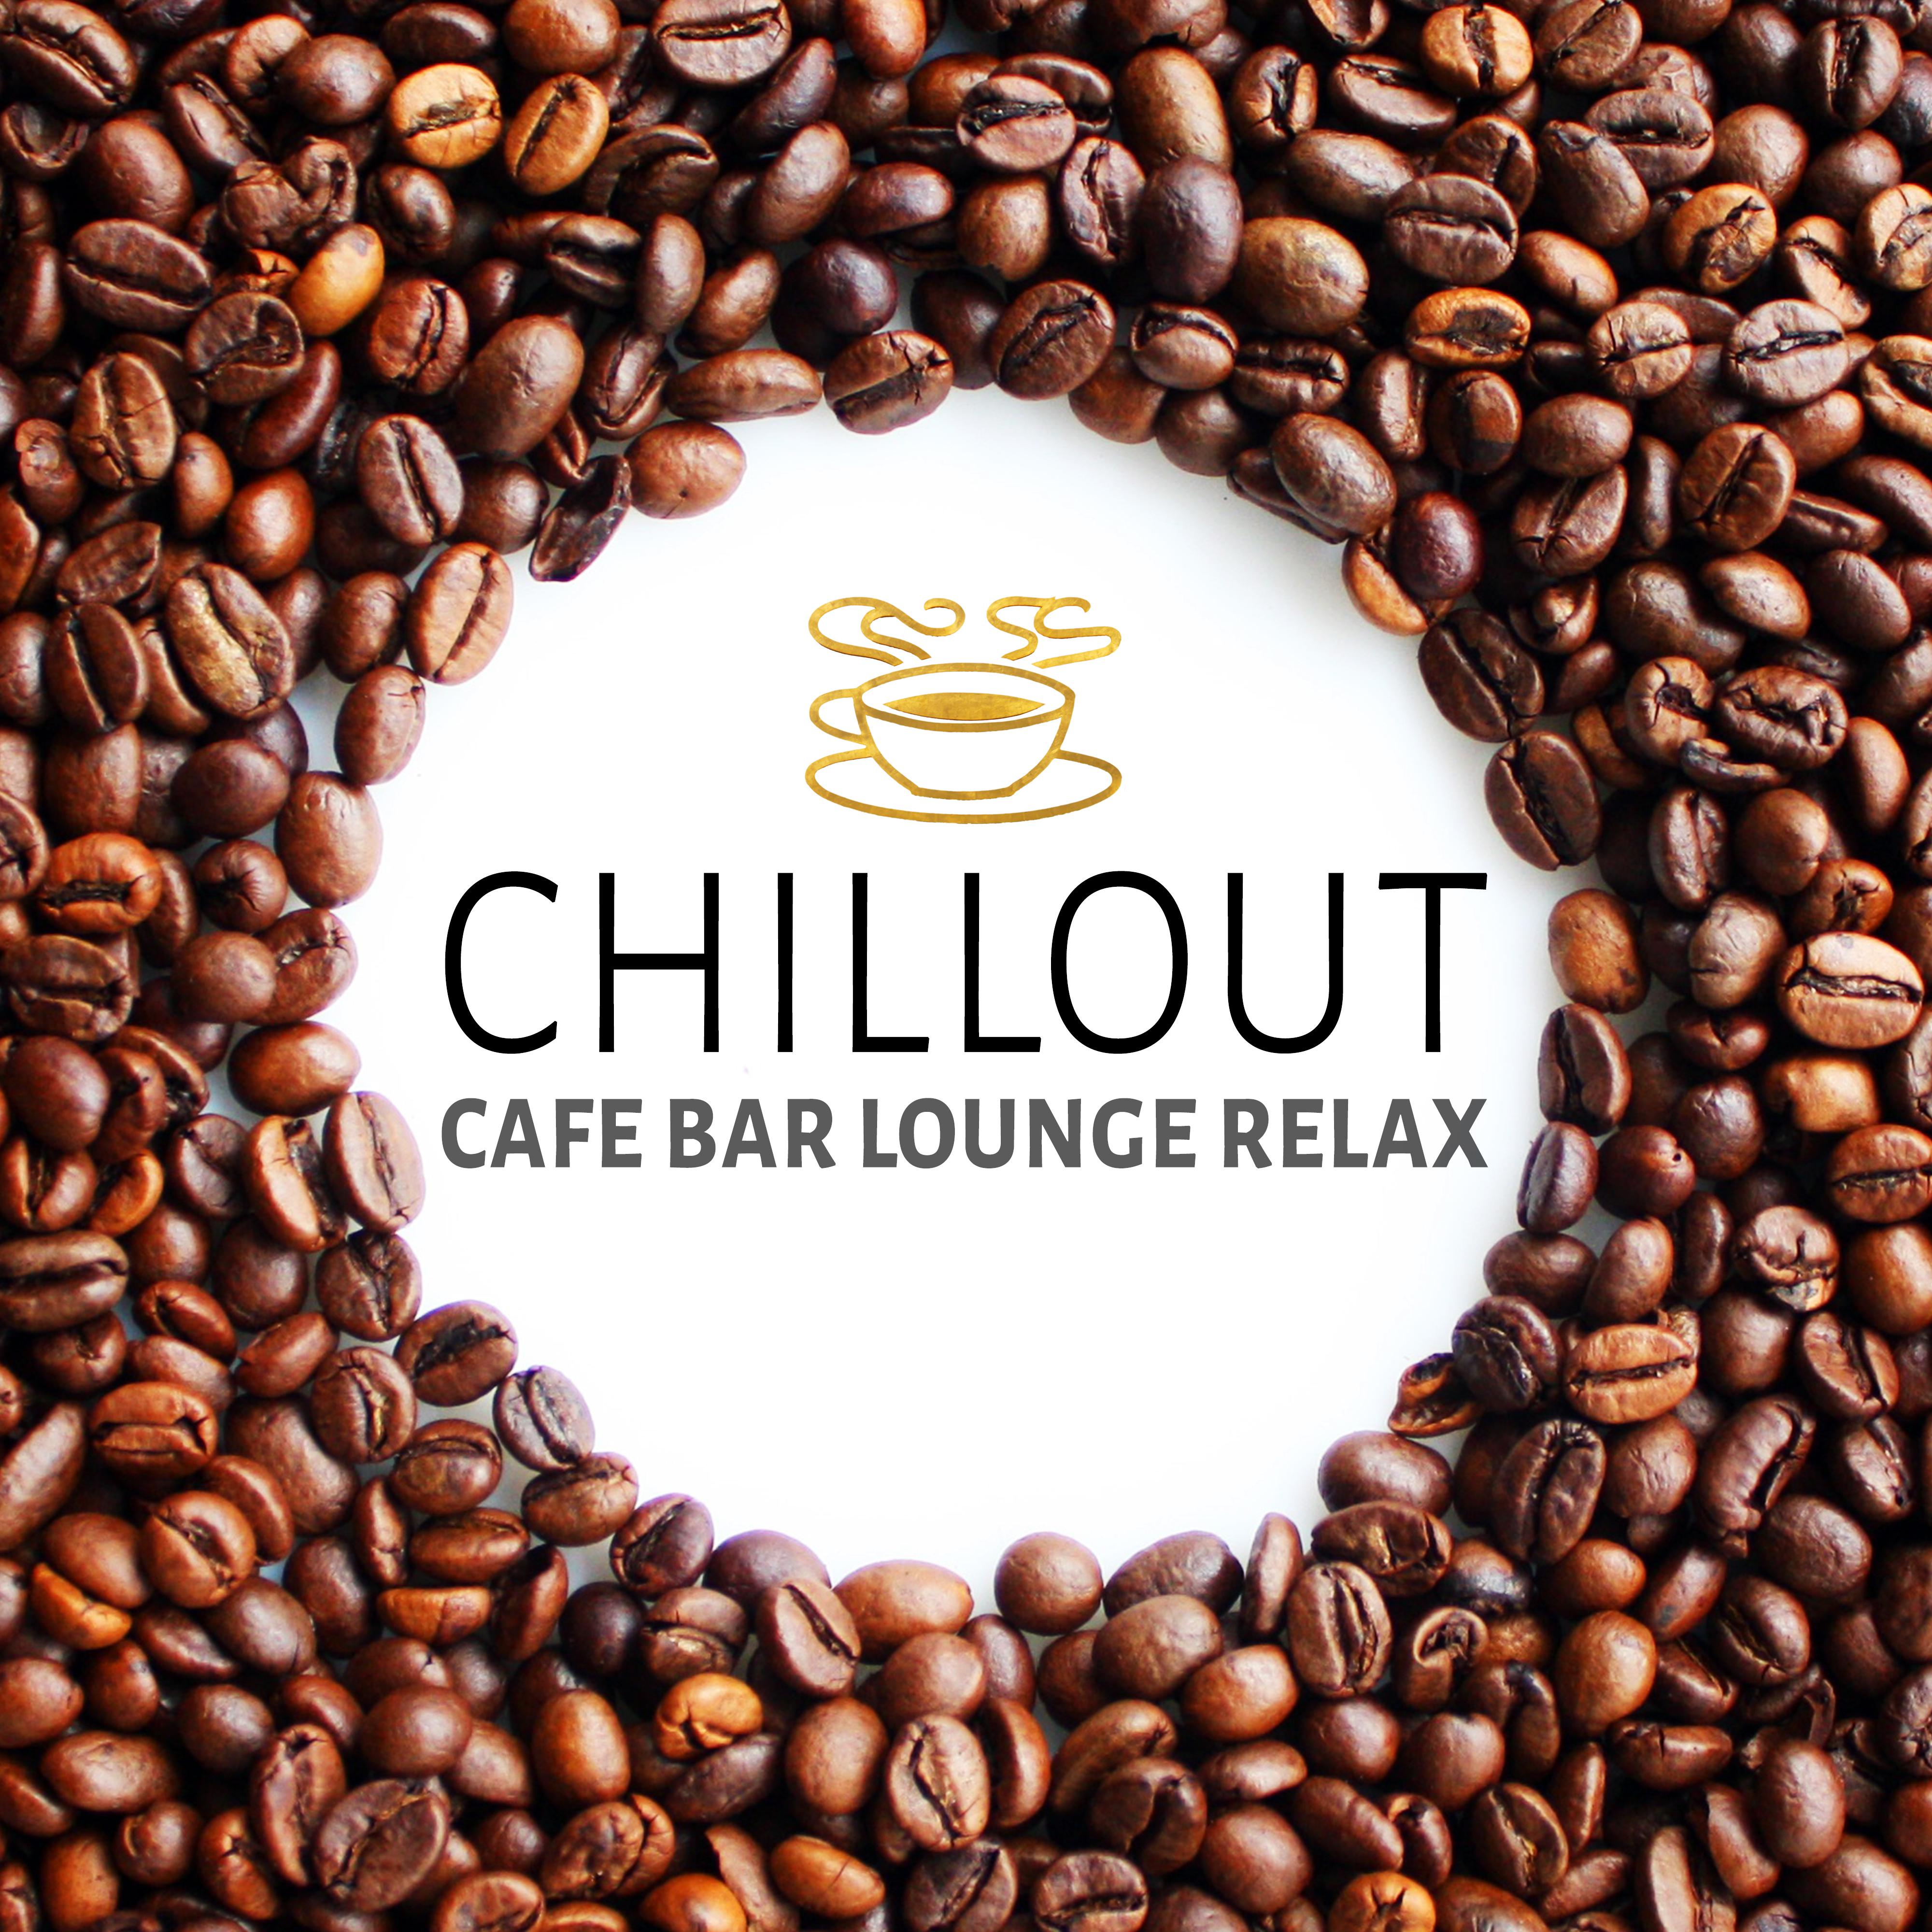 Chillout Music - Mood Music and Chillout Party, Cafe Bar Lounge Relax & Hotel Lounge Music, Cool Instrumental Music, Deep Relaxation